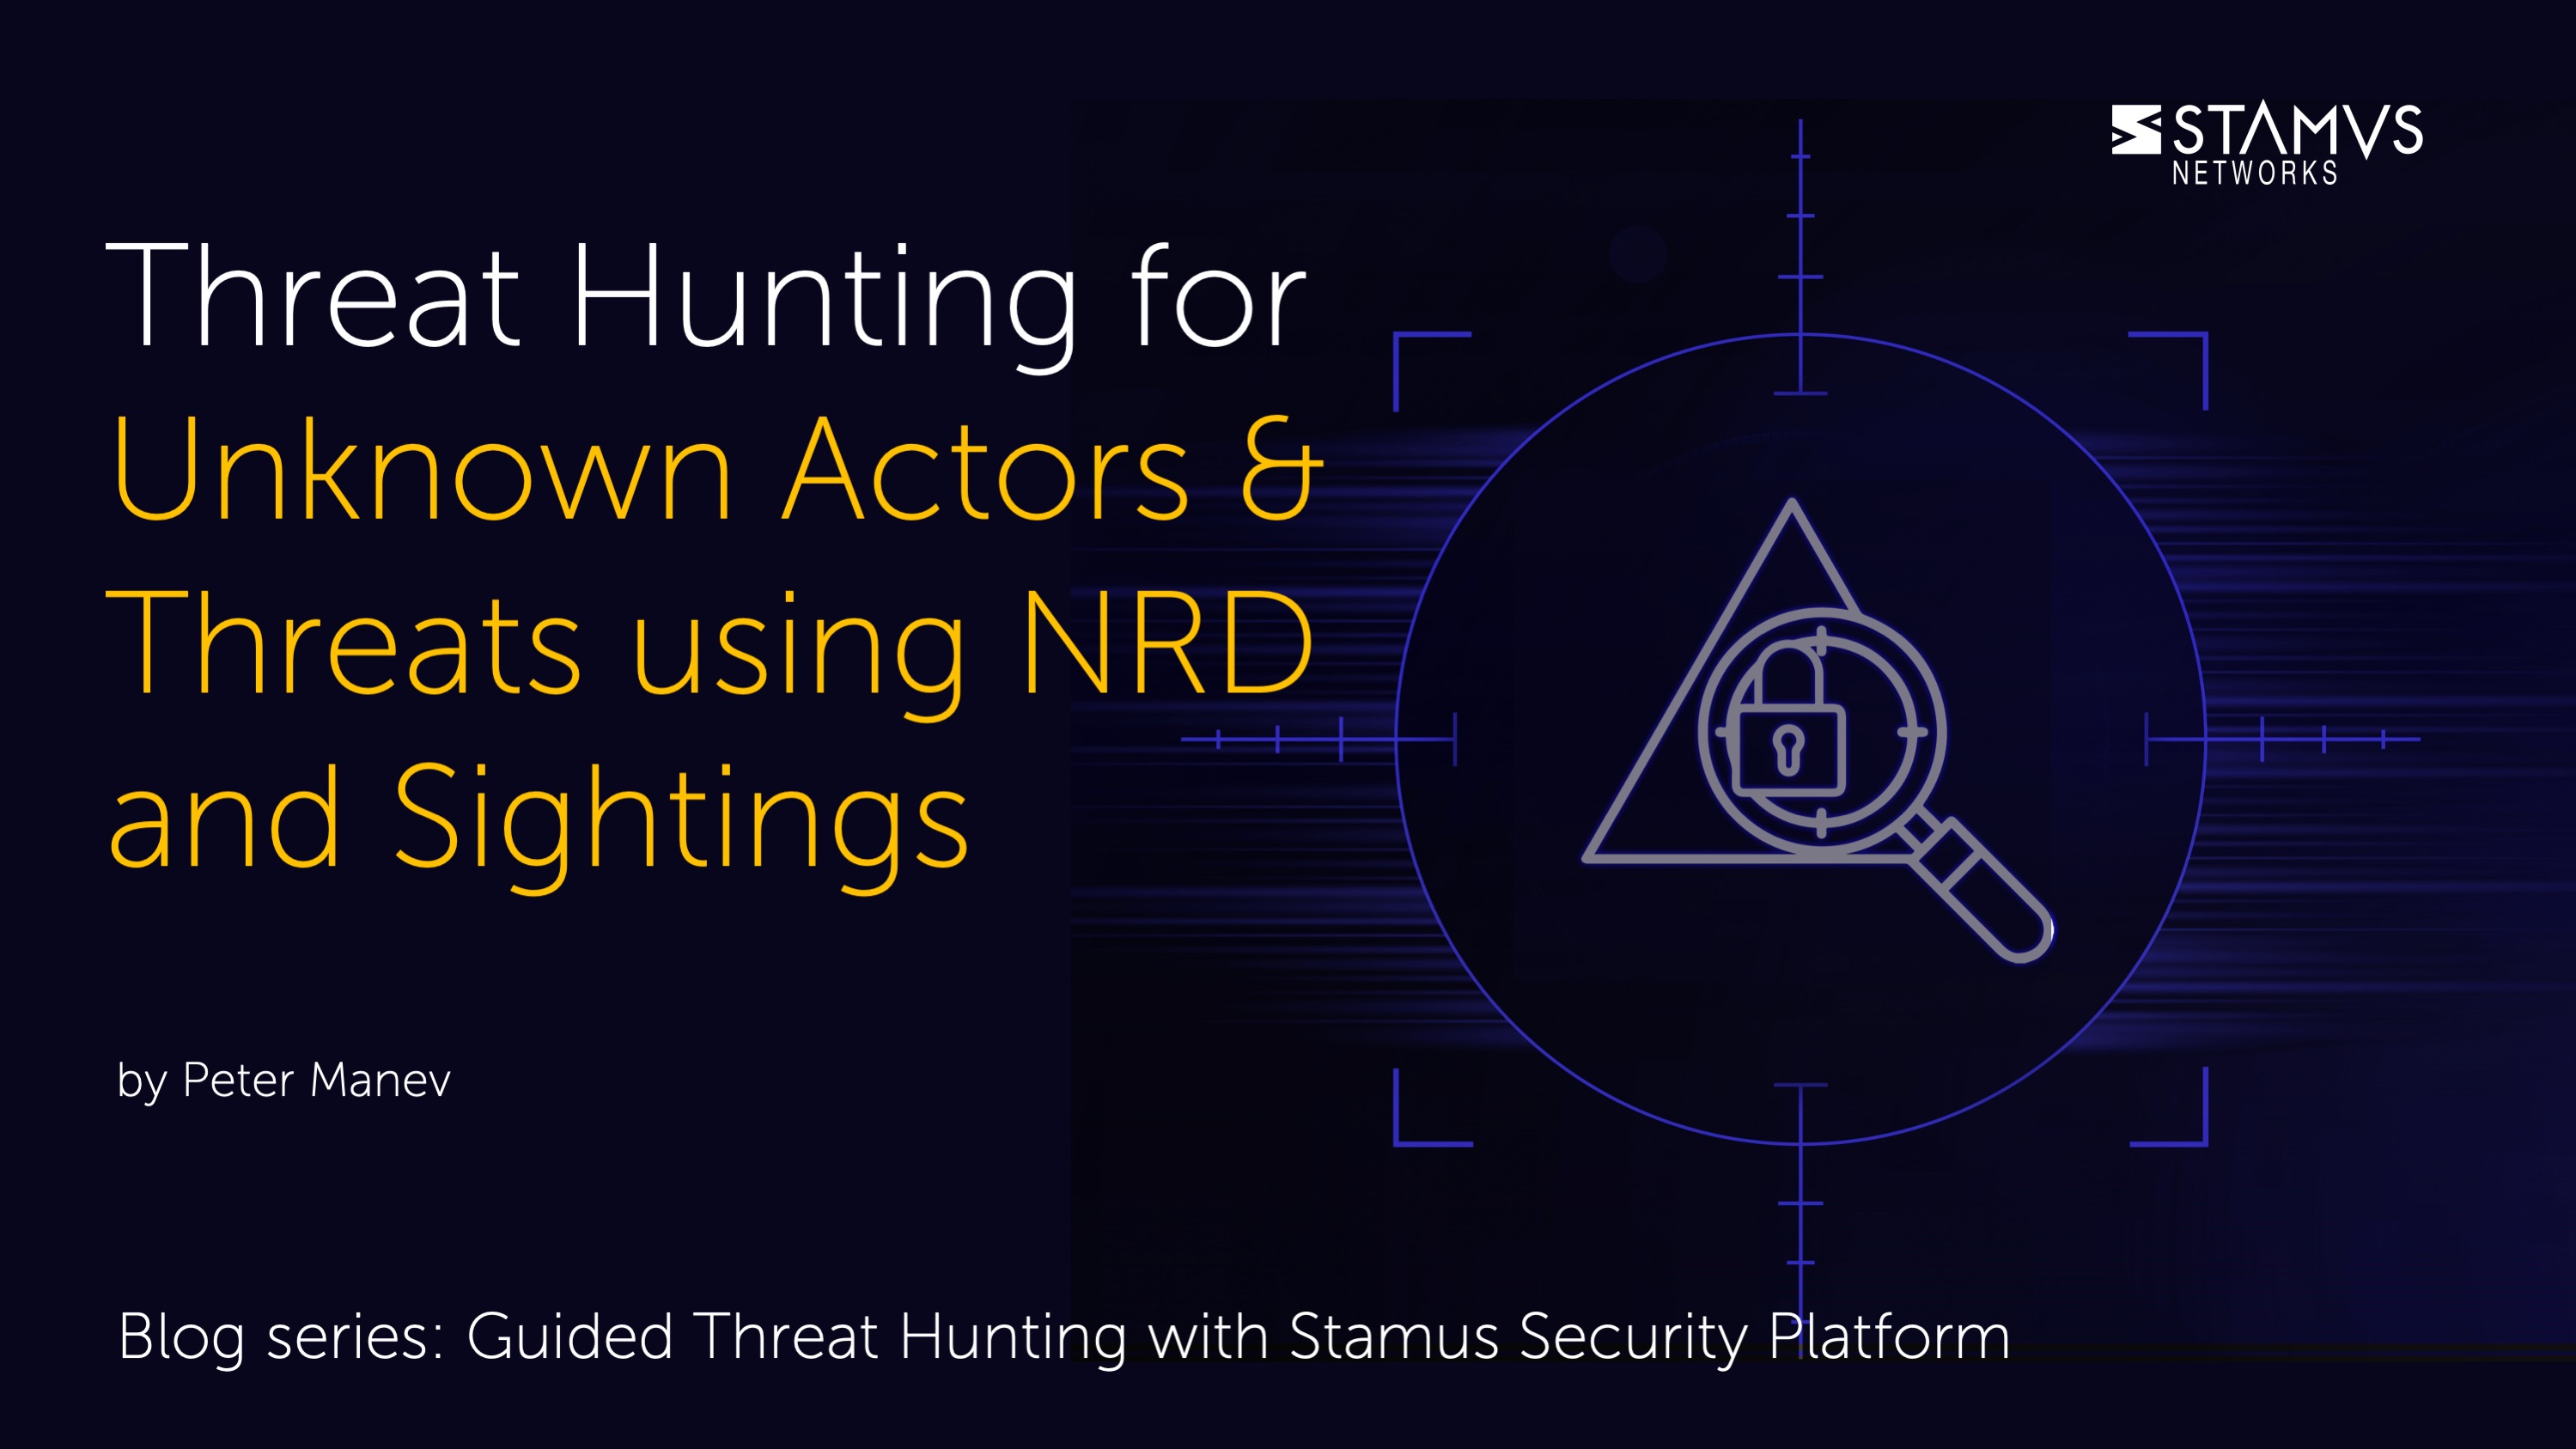 Threat Hunting for Unknown Actors & Threats using NRD and Sightings